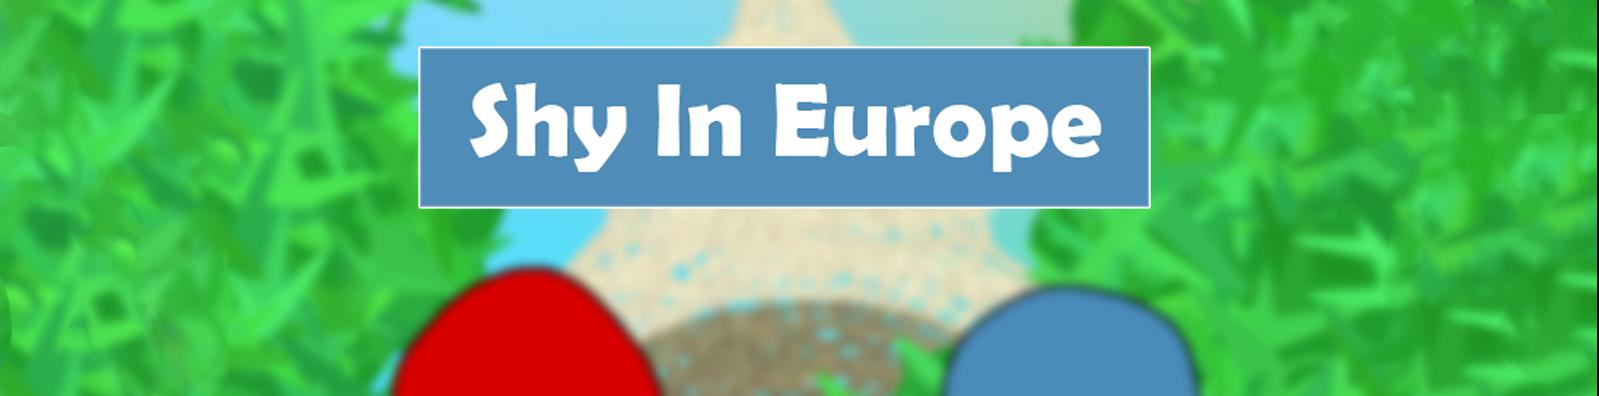 Shy In Europe v0.1 by Nilx_games